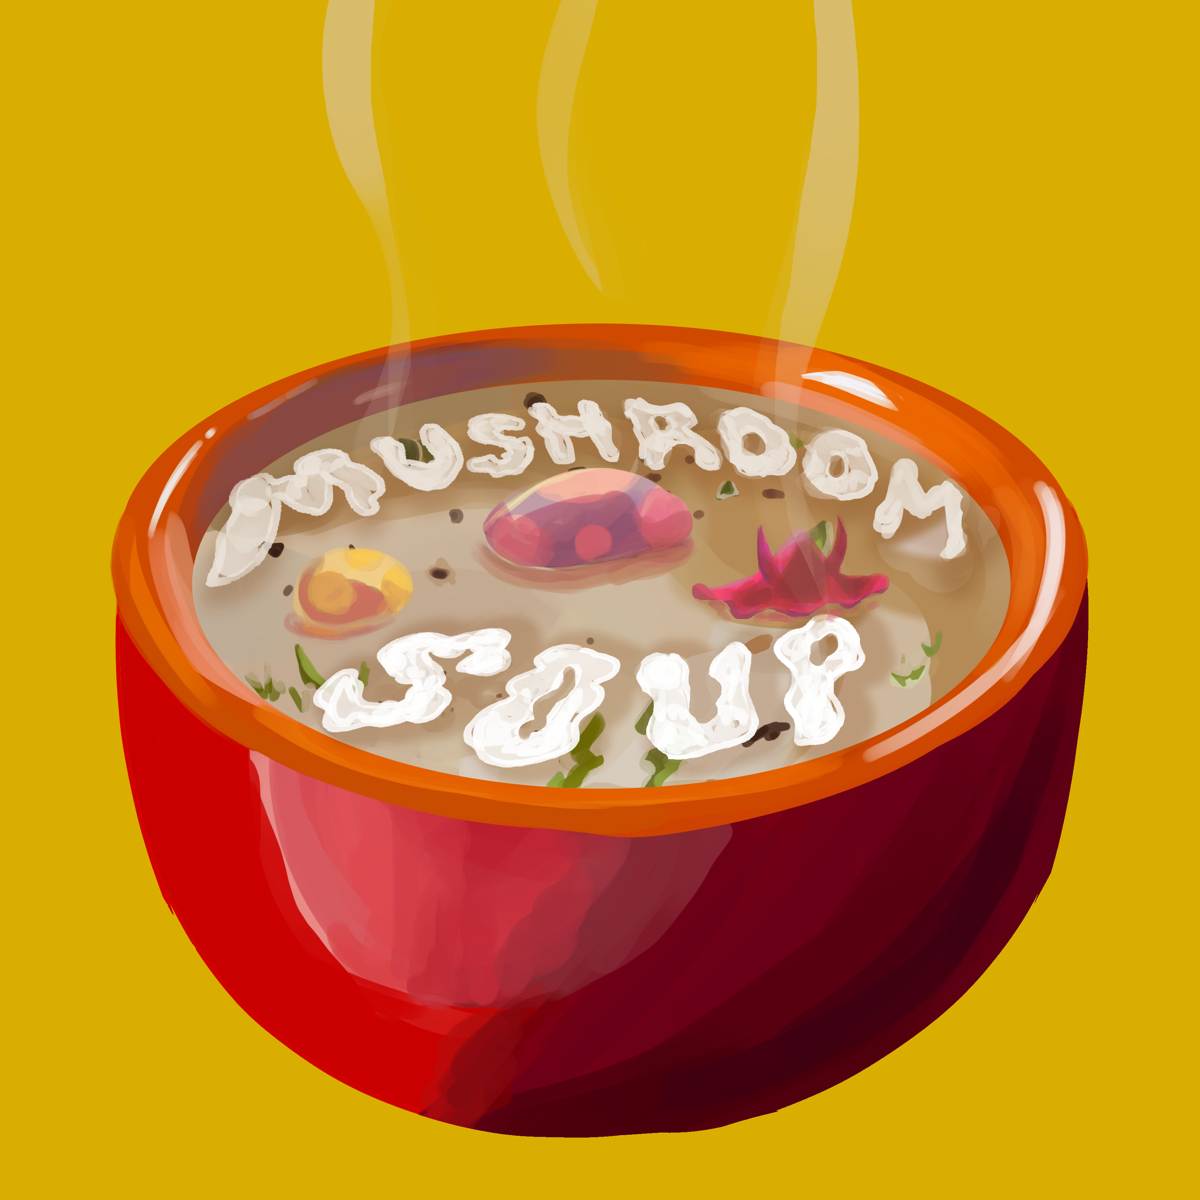 Mushroom Soup cover art. A delicious and steaming bowl of soup with the title of the show written hazily in the broth. In the middle of the bowl three mushroom caps stick out, representing Amy Terry, Joe Langlois, and Jupiter Morningstar.